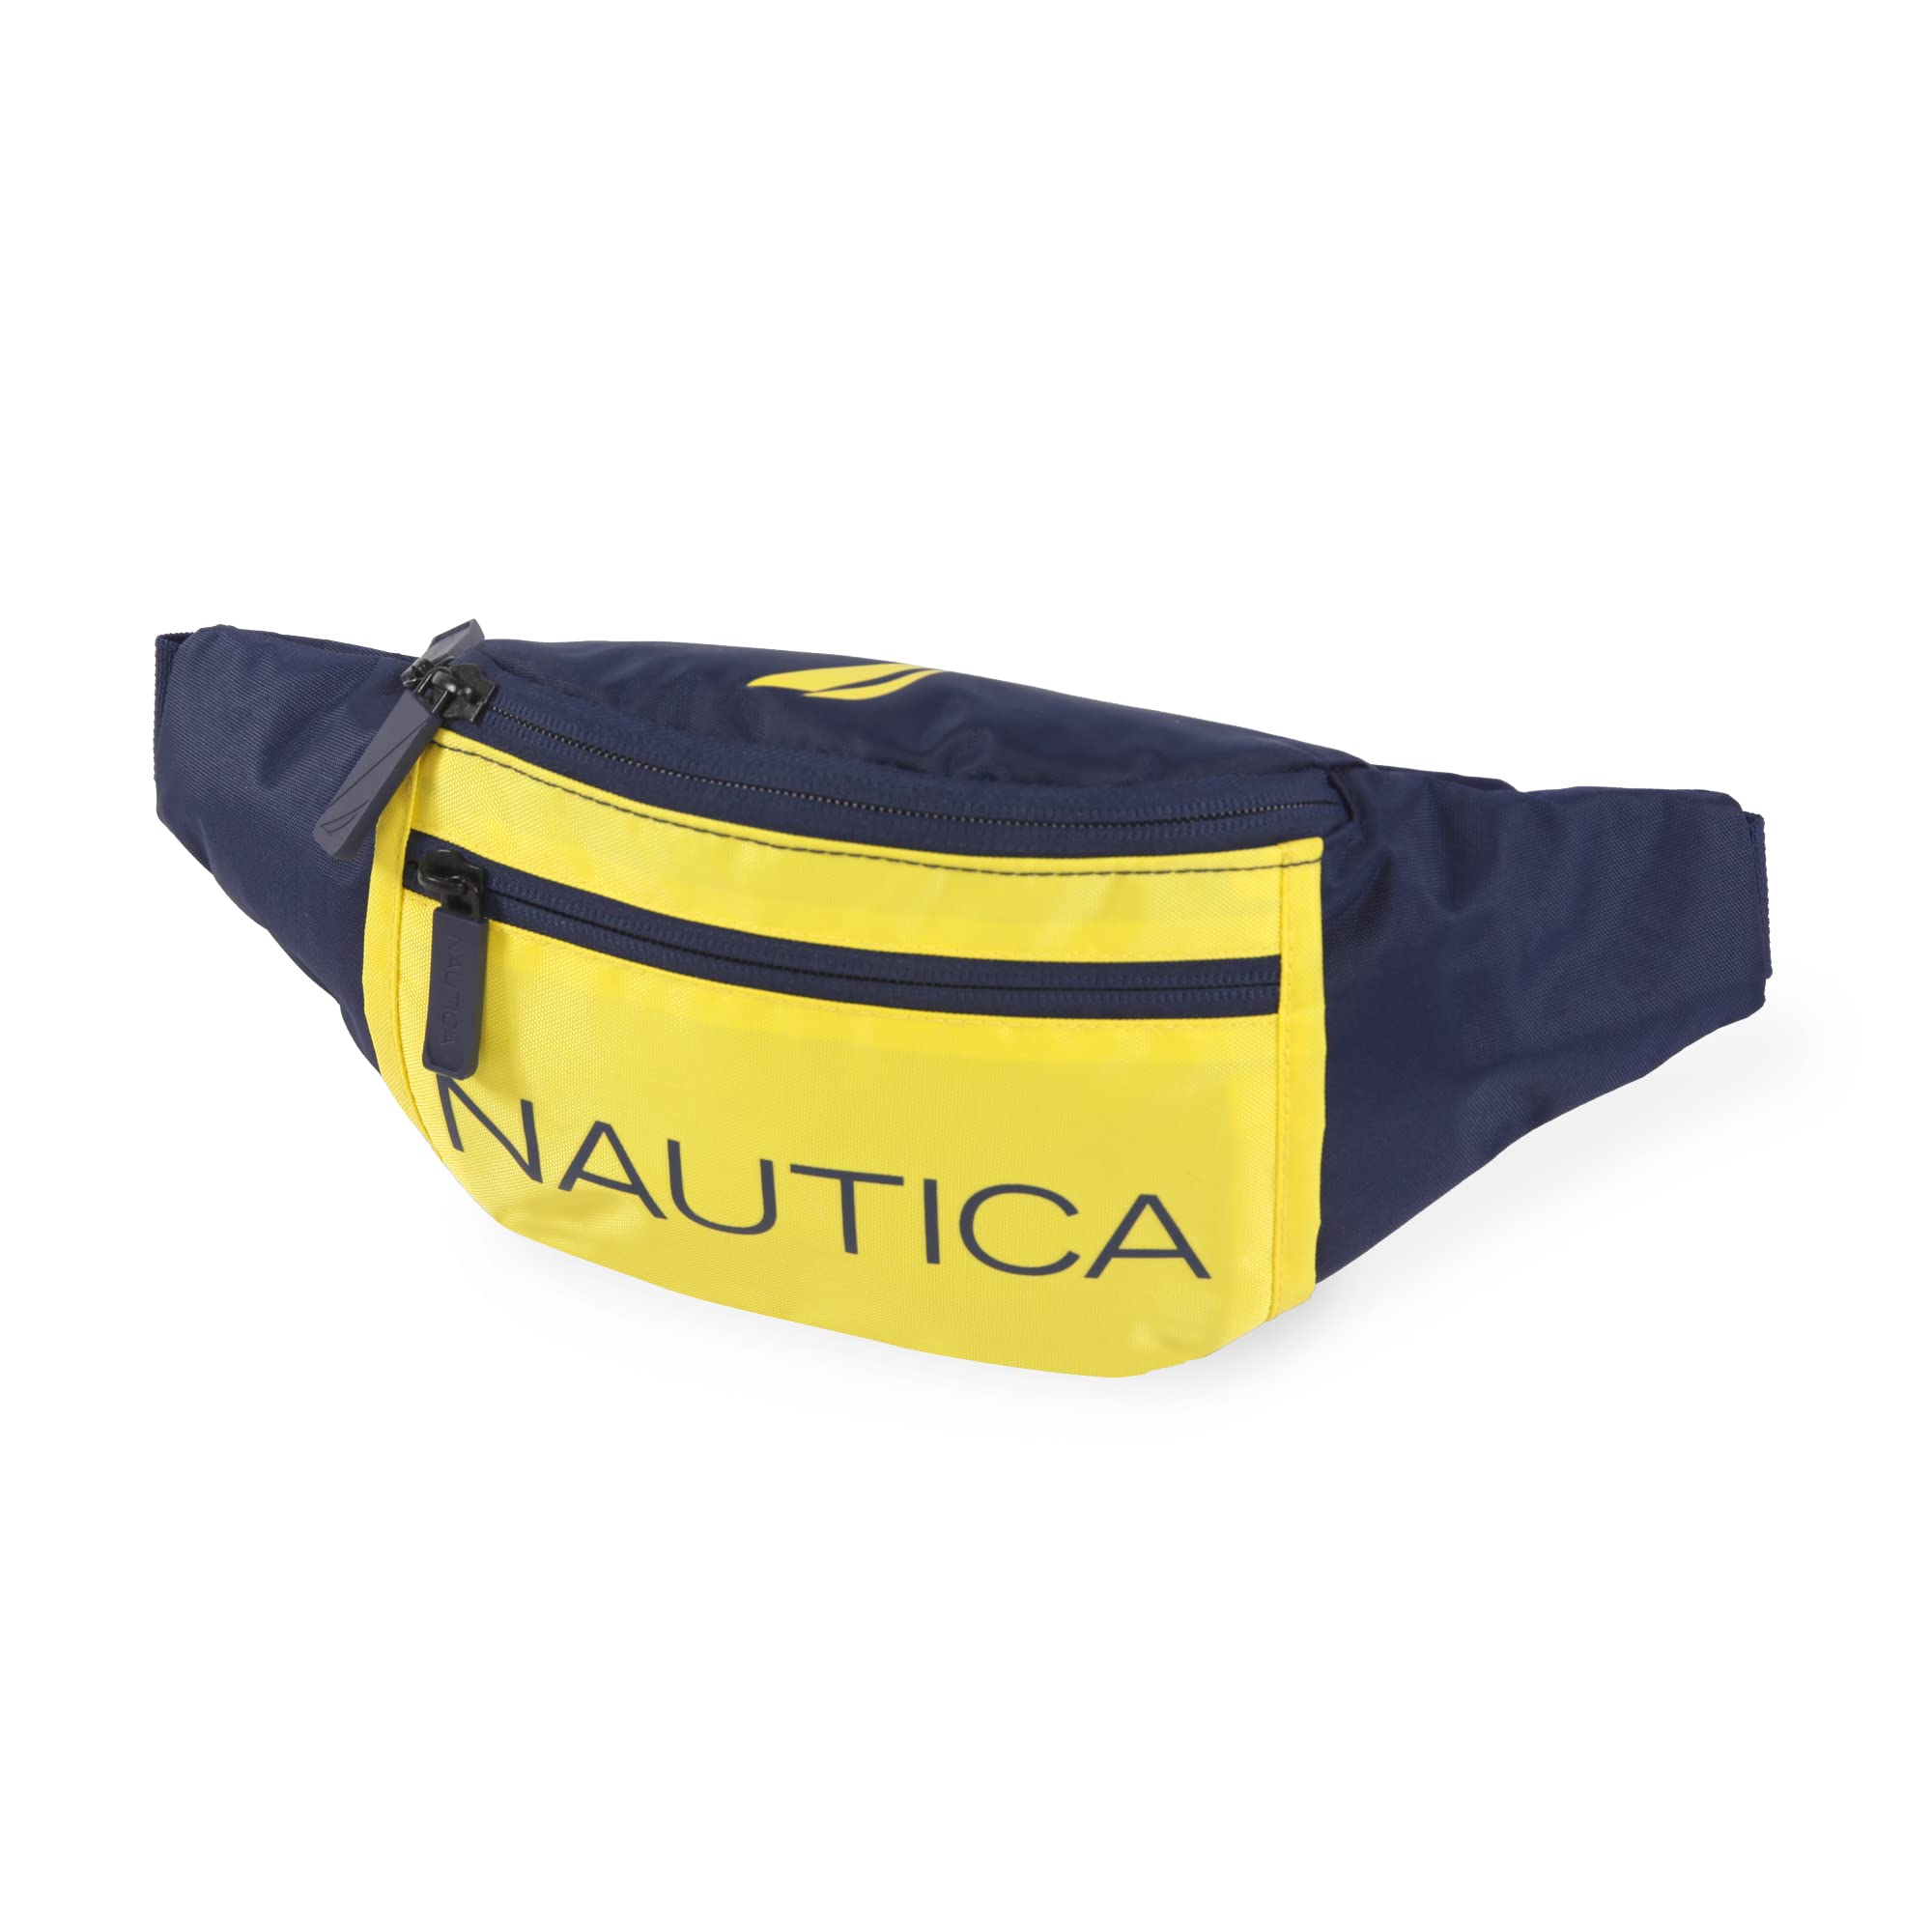 NAUTICA Fanny Pack, Navy Yellow, One Size